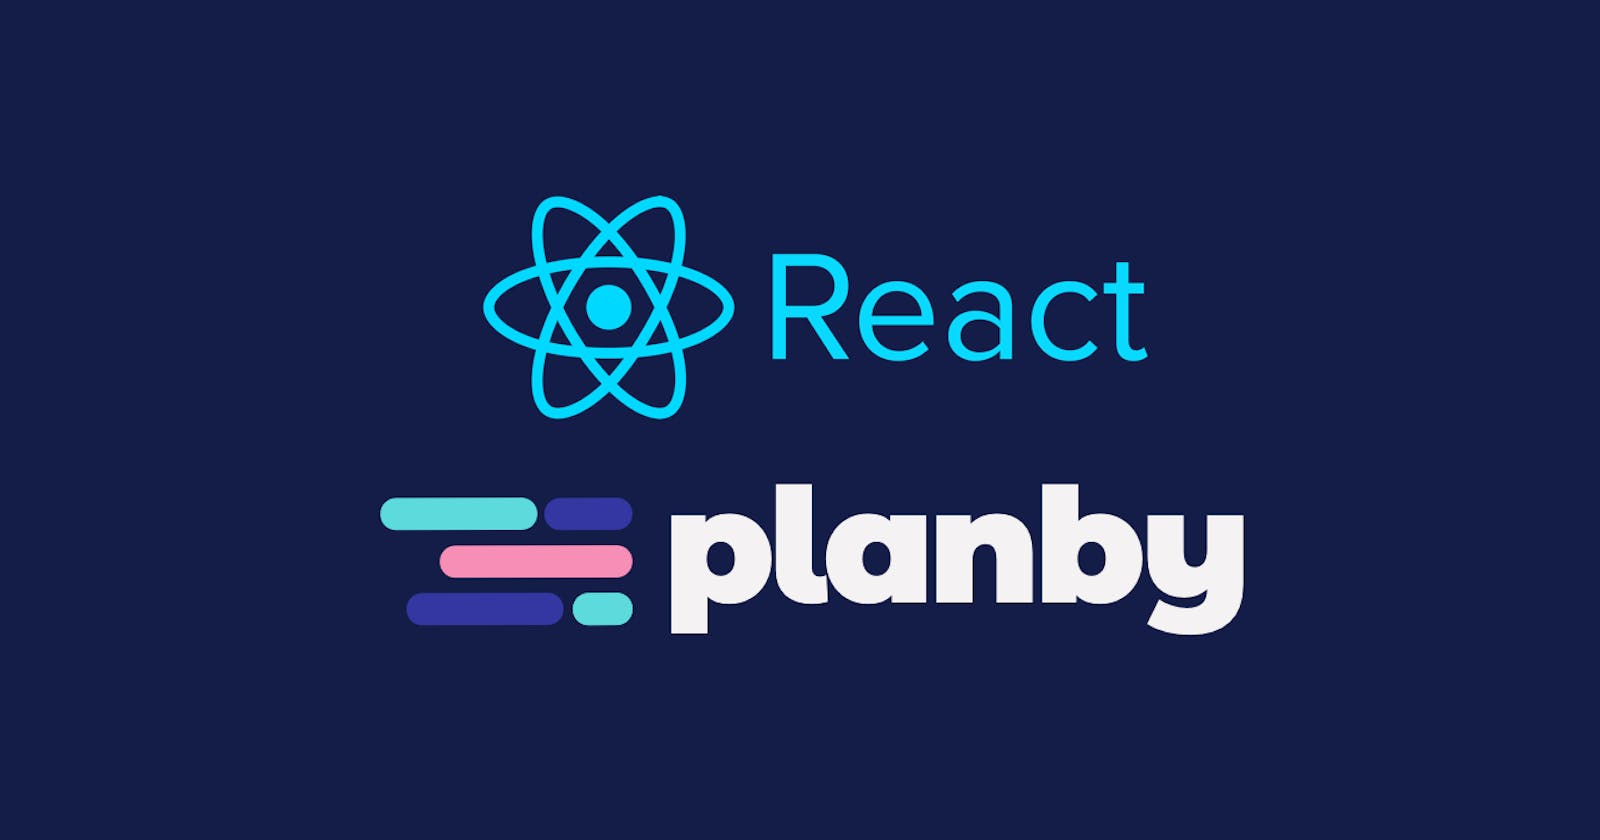 Electronic Program Guide for React, it’s so easy with Planby.